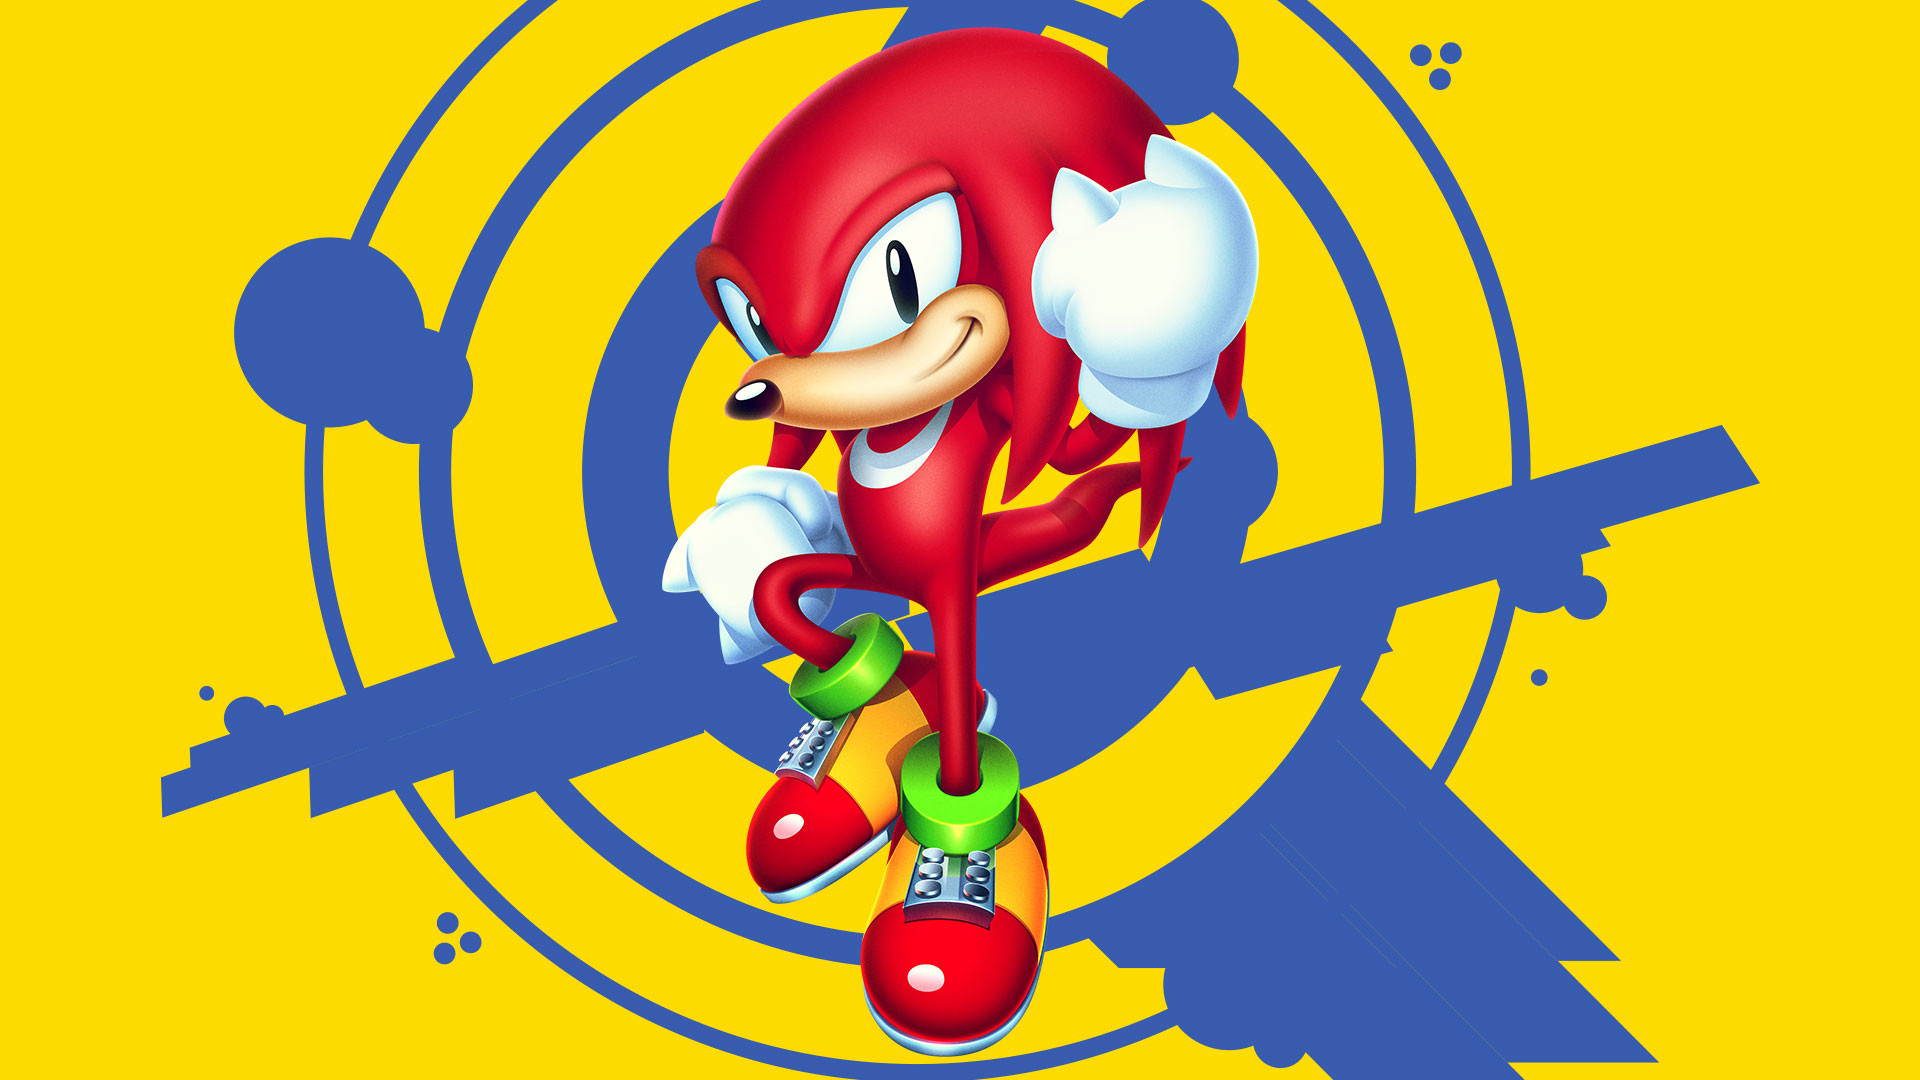 Sonic vs Knuckles wallpaper by TheSpawner97  Download on ZEDGE  8598